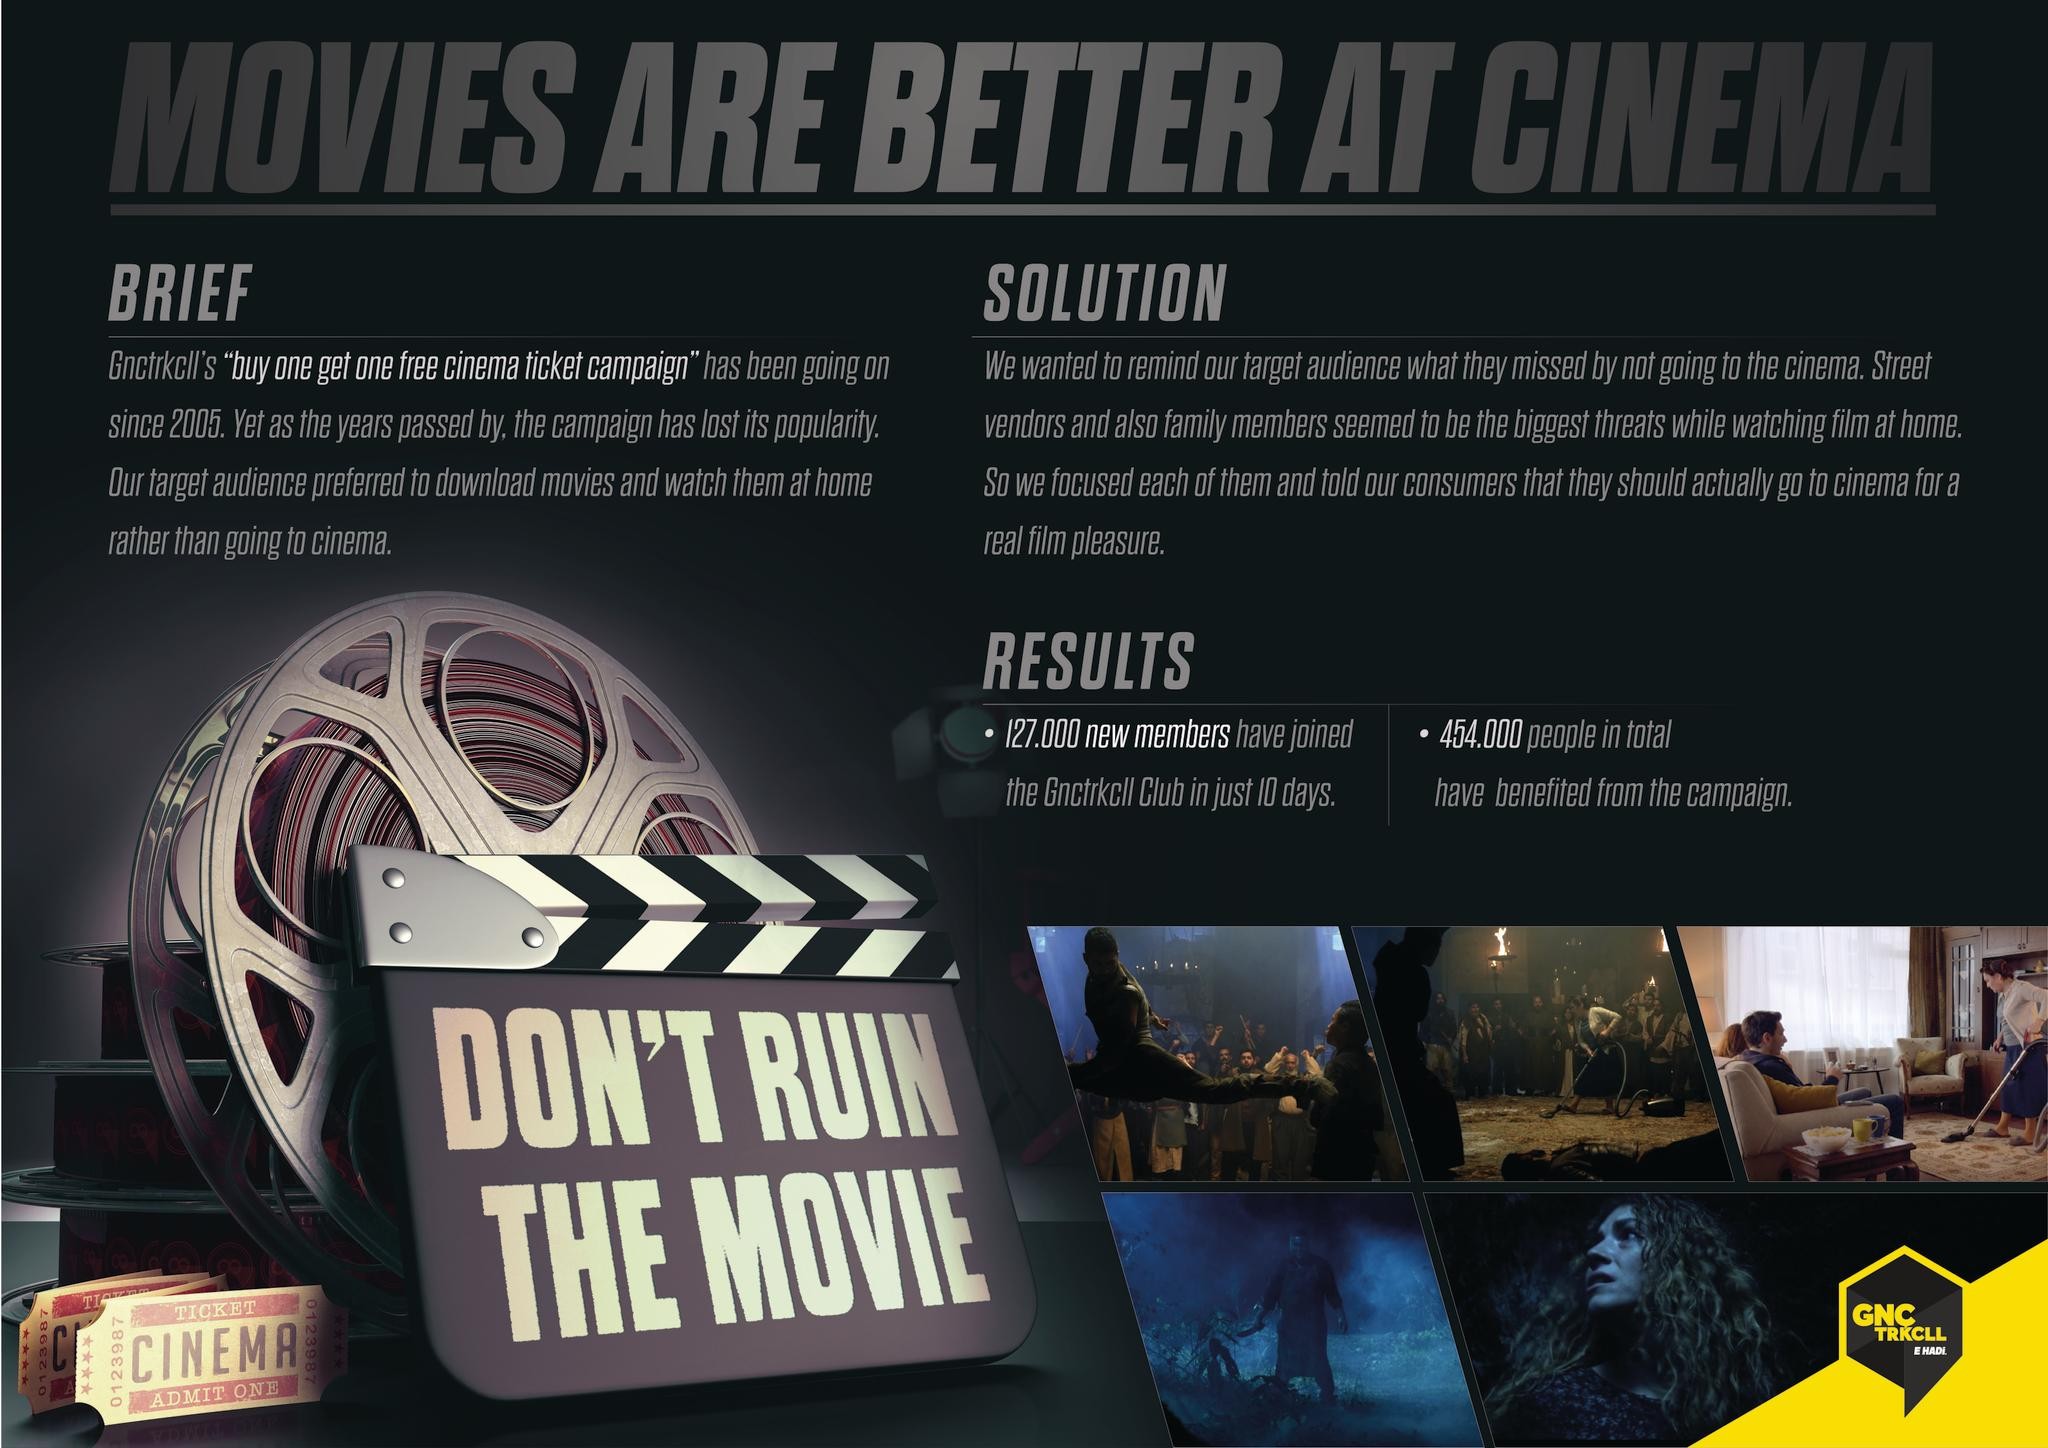 MOVIES ARE BETTER AT CINEMA